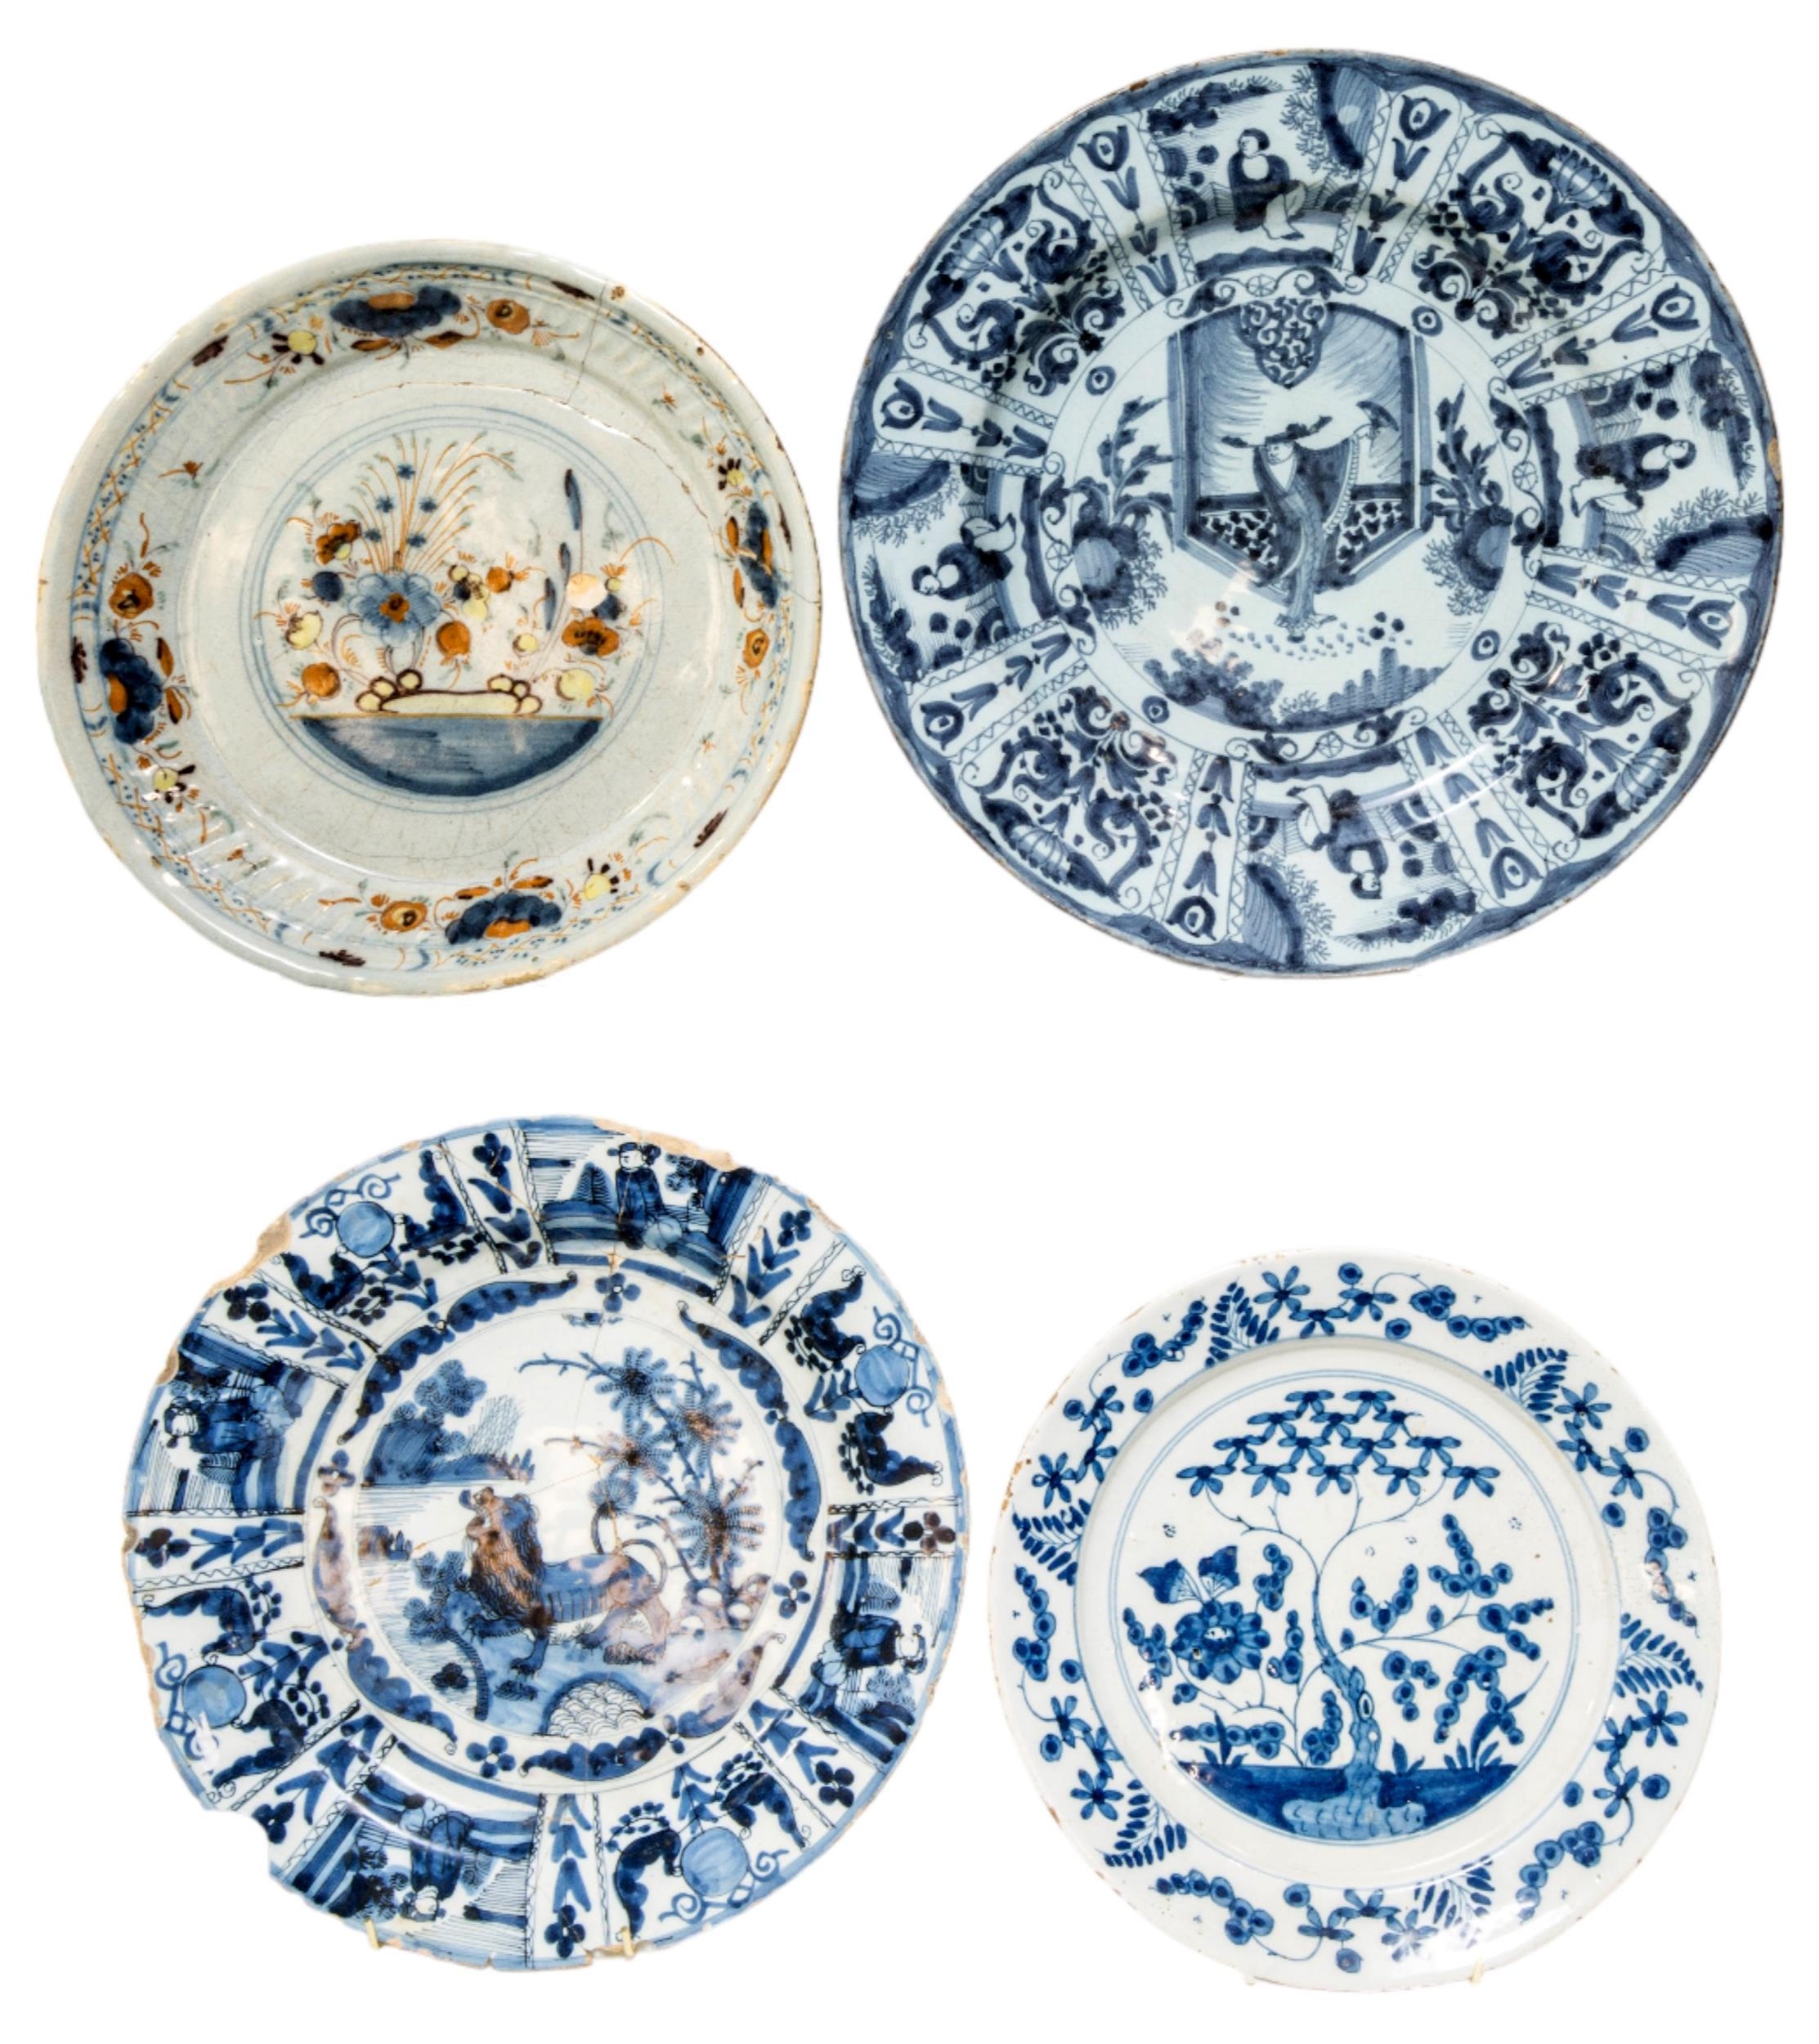 A MIXED GROUP OF FOUR DUTCH DELFT DISHES, 17TH/18TH CENTURY, the lot includes a polychrome dish